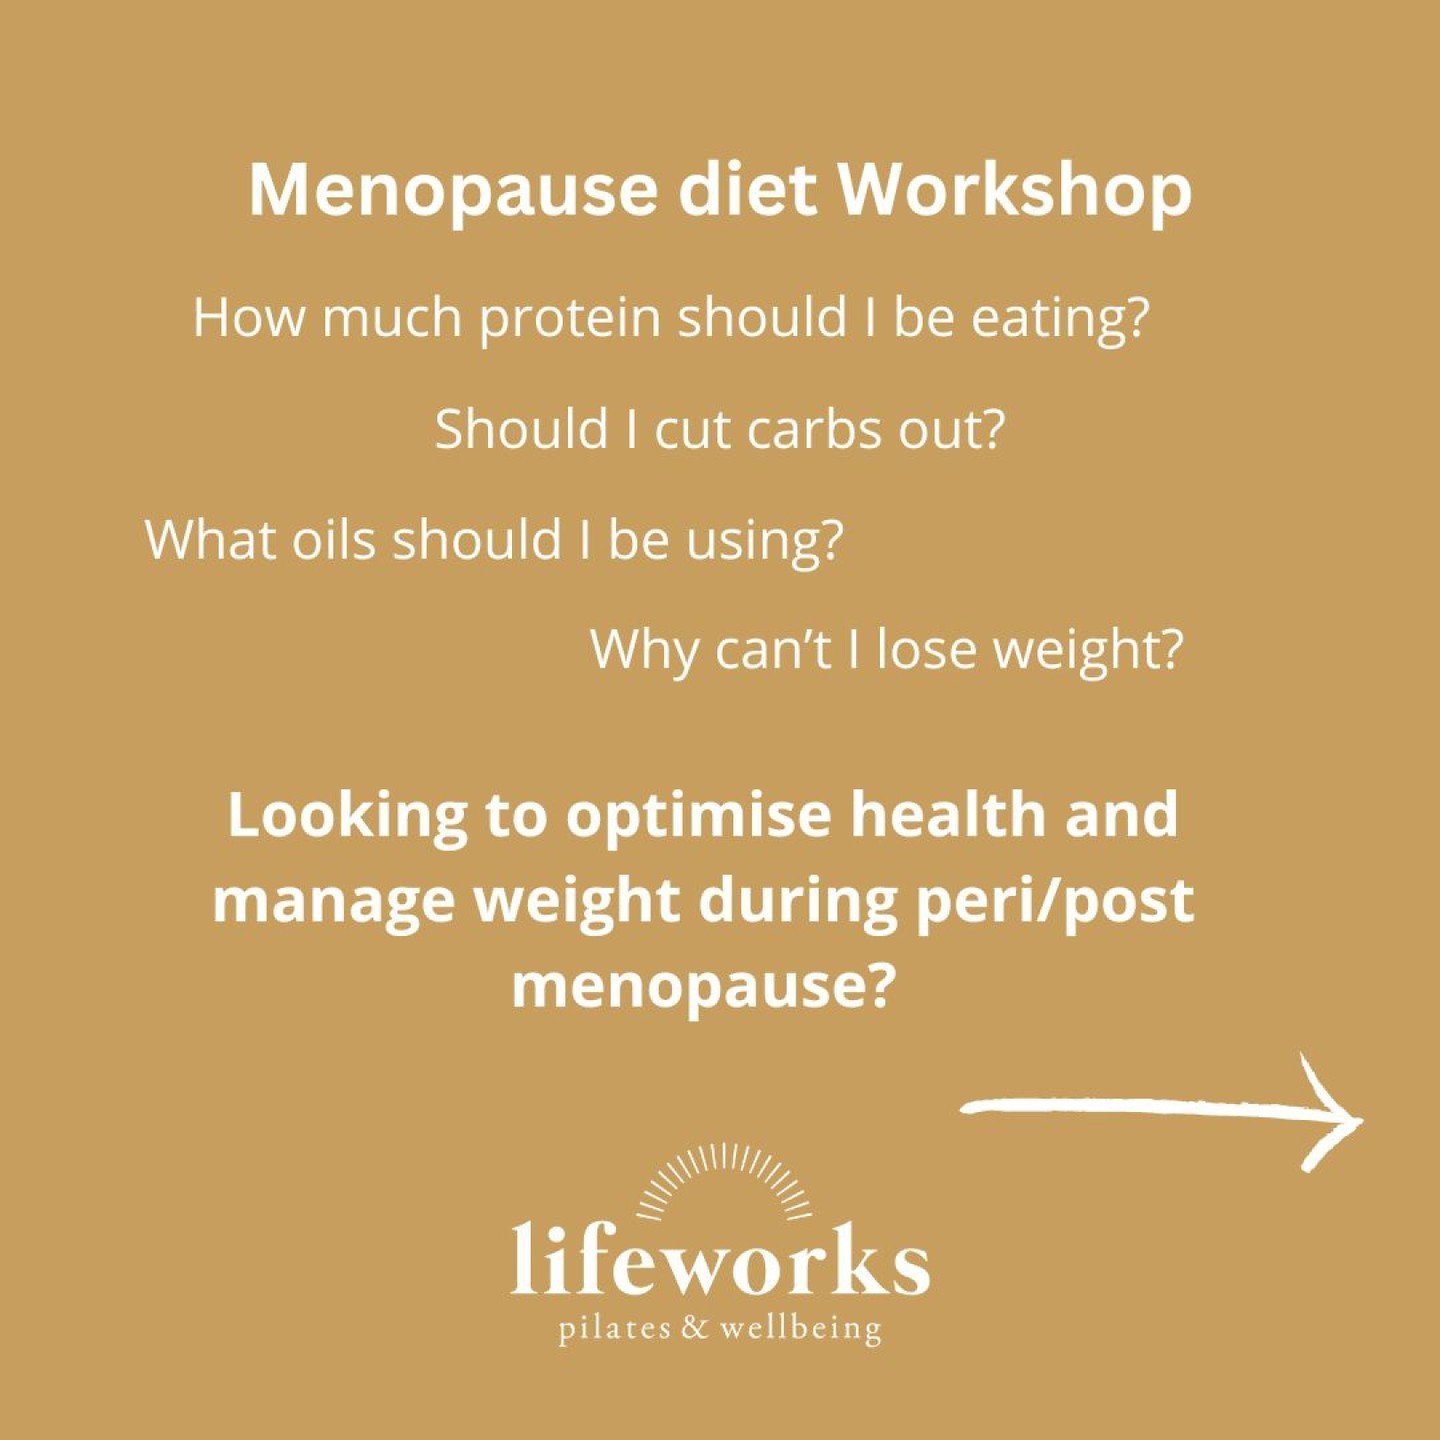 Getting confused about all the mixed messages during menopause? Attend our nutrition workshop run by Chrissy Freer (RNutr) on Monday 6th May 6:30-8 pm to gain insight and strategies to optimise health, manage weight and embrace vitality during perime